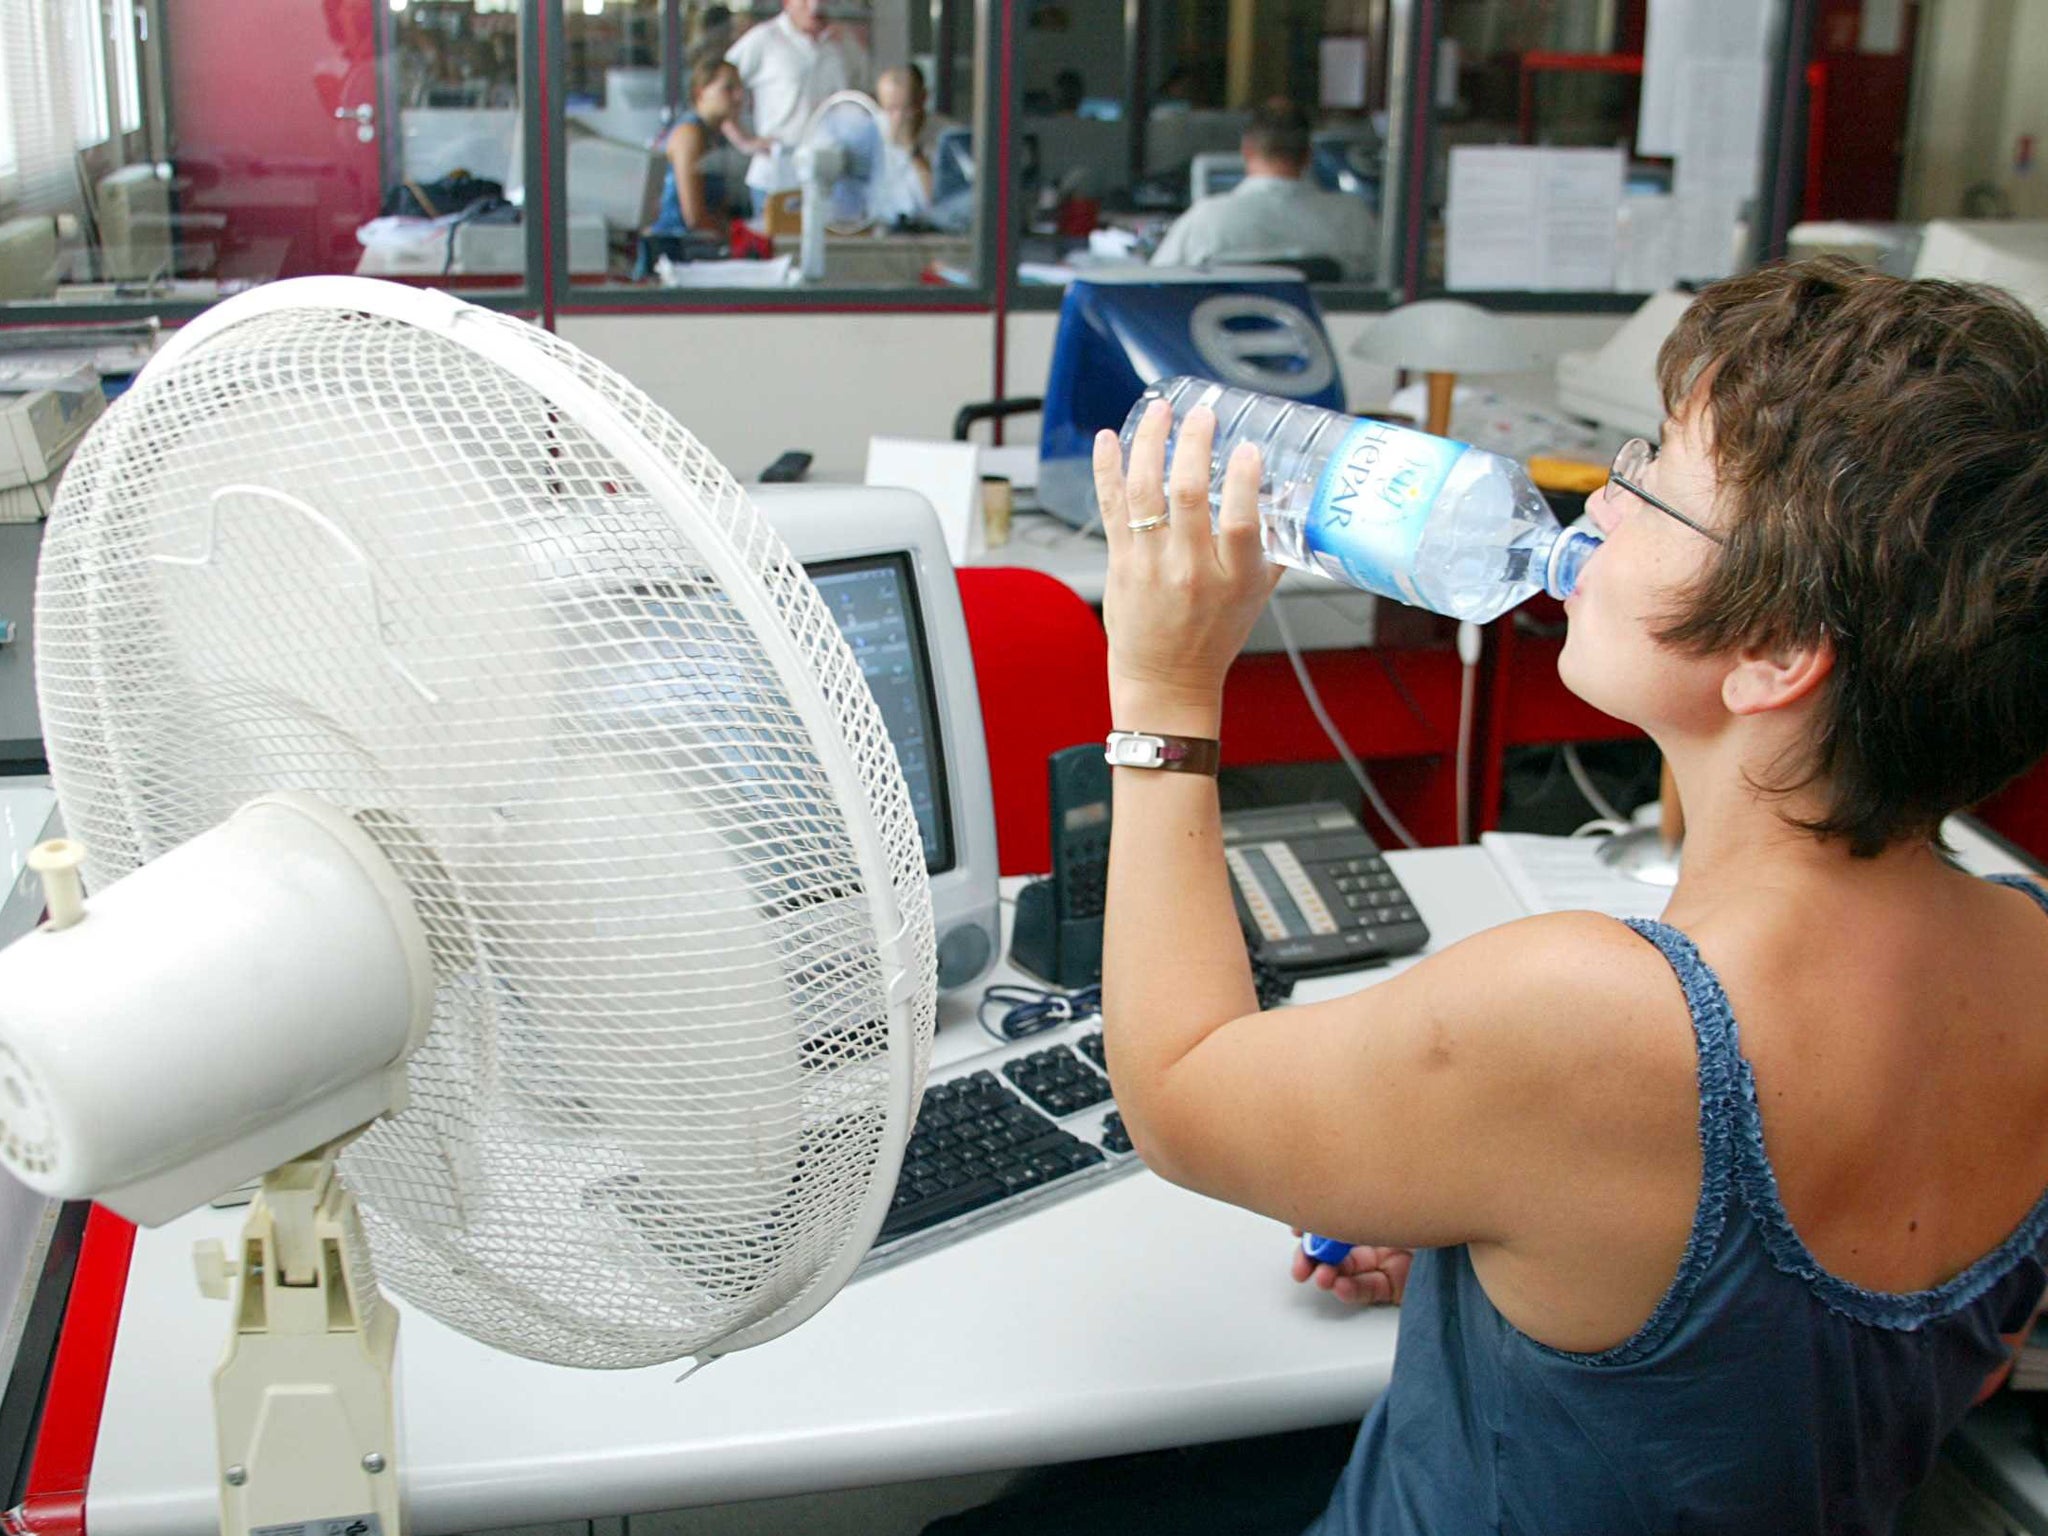 As temperatures soar, offices become increasingly uncomfortable places to work